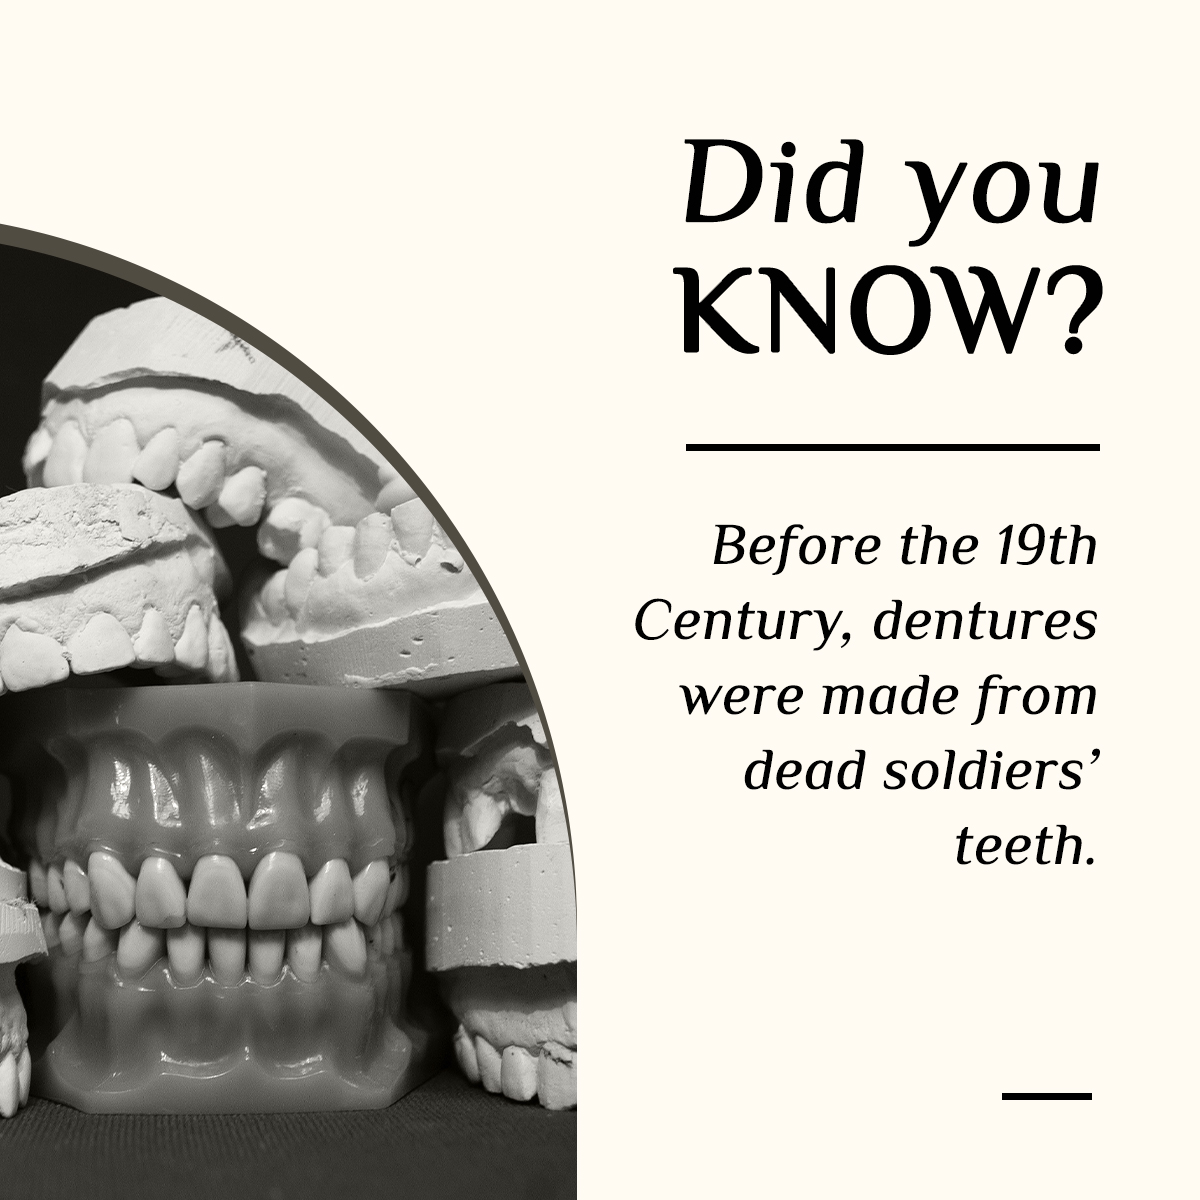 No, just no!

#historicalfacts #didyouknow